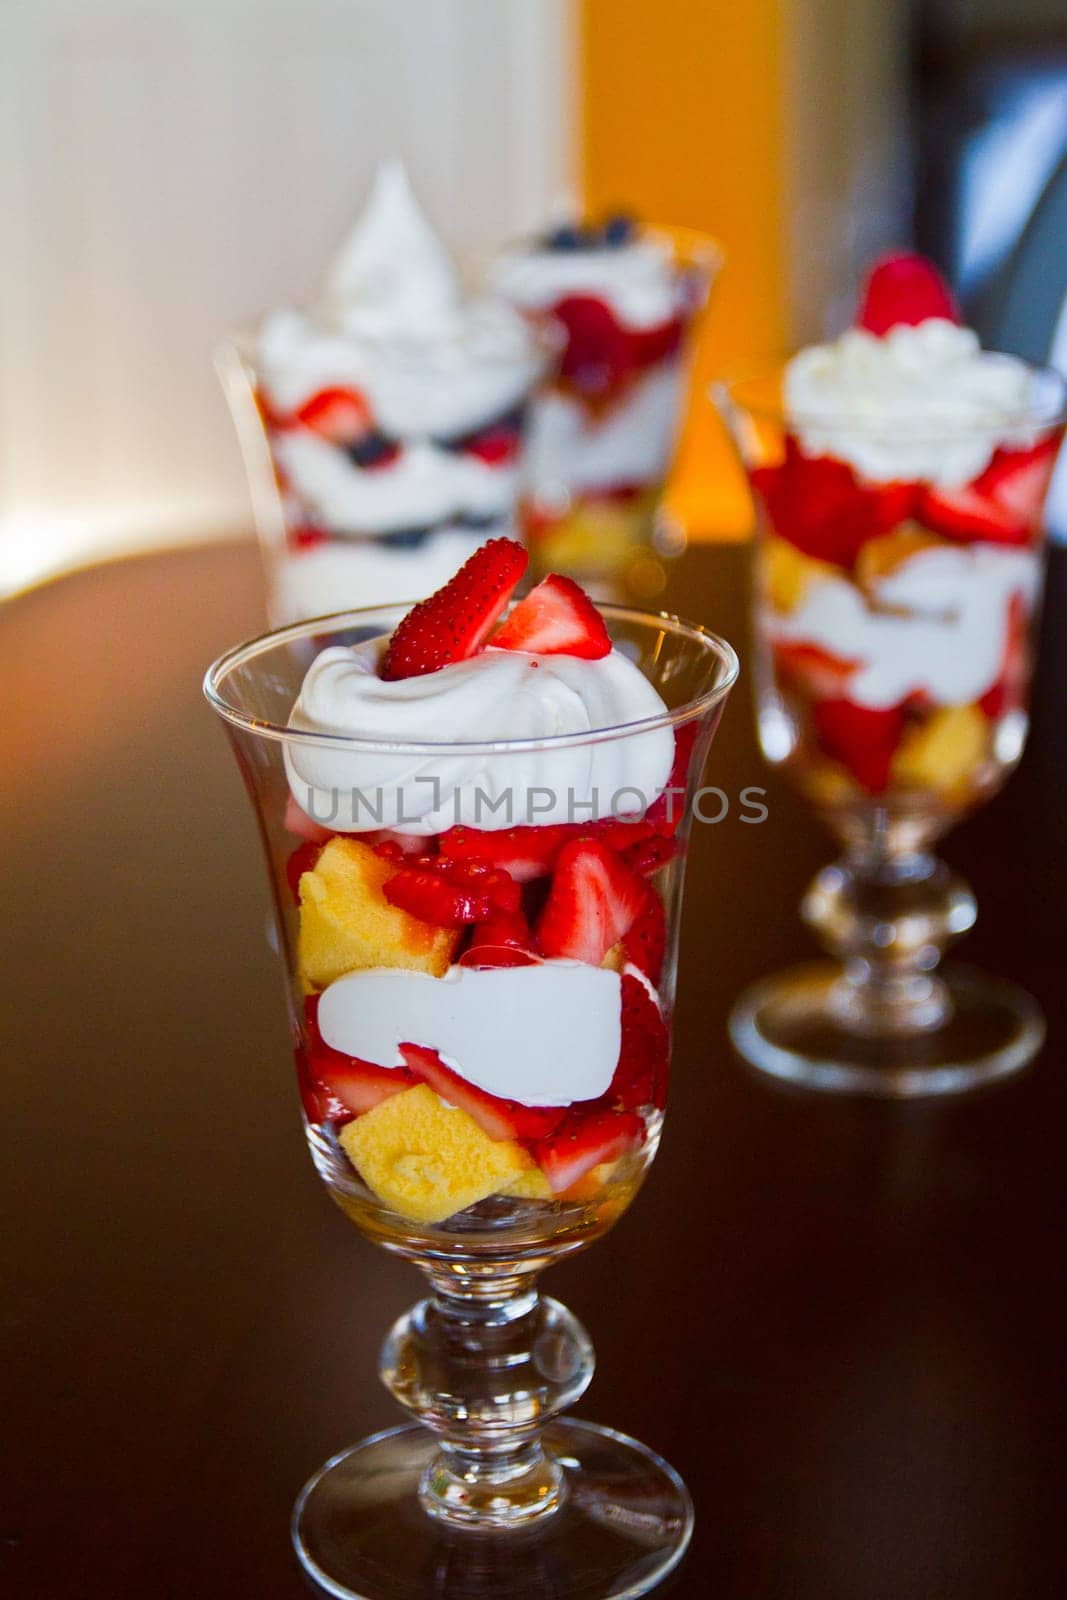 Deliciously decadent strawberry shortcake desserts in glass cups, featuring layers of juicy red strawberries, golden cake cubes, and creamy whipped cream. Perfect for summer gatherings or special occasions.